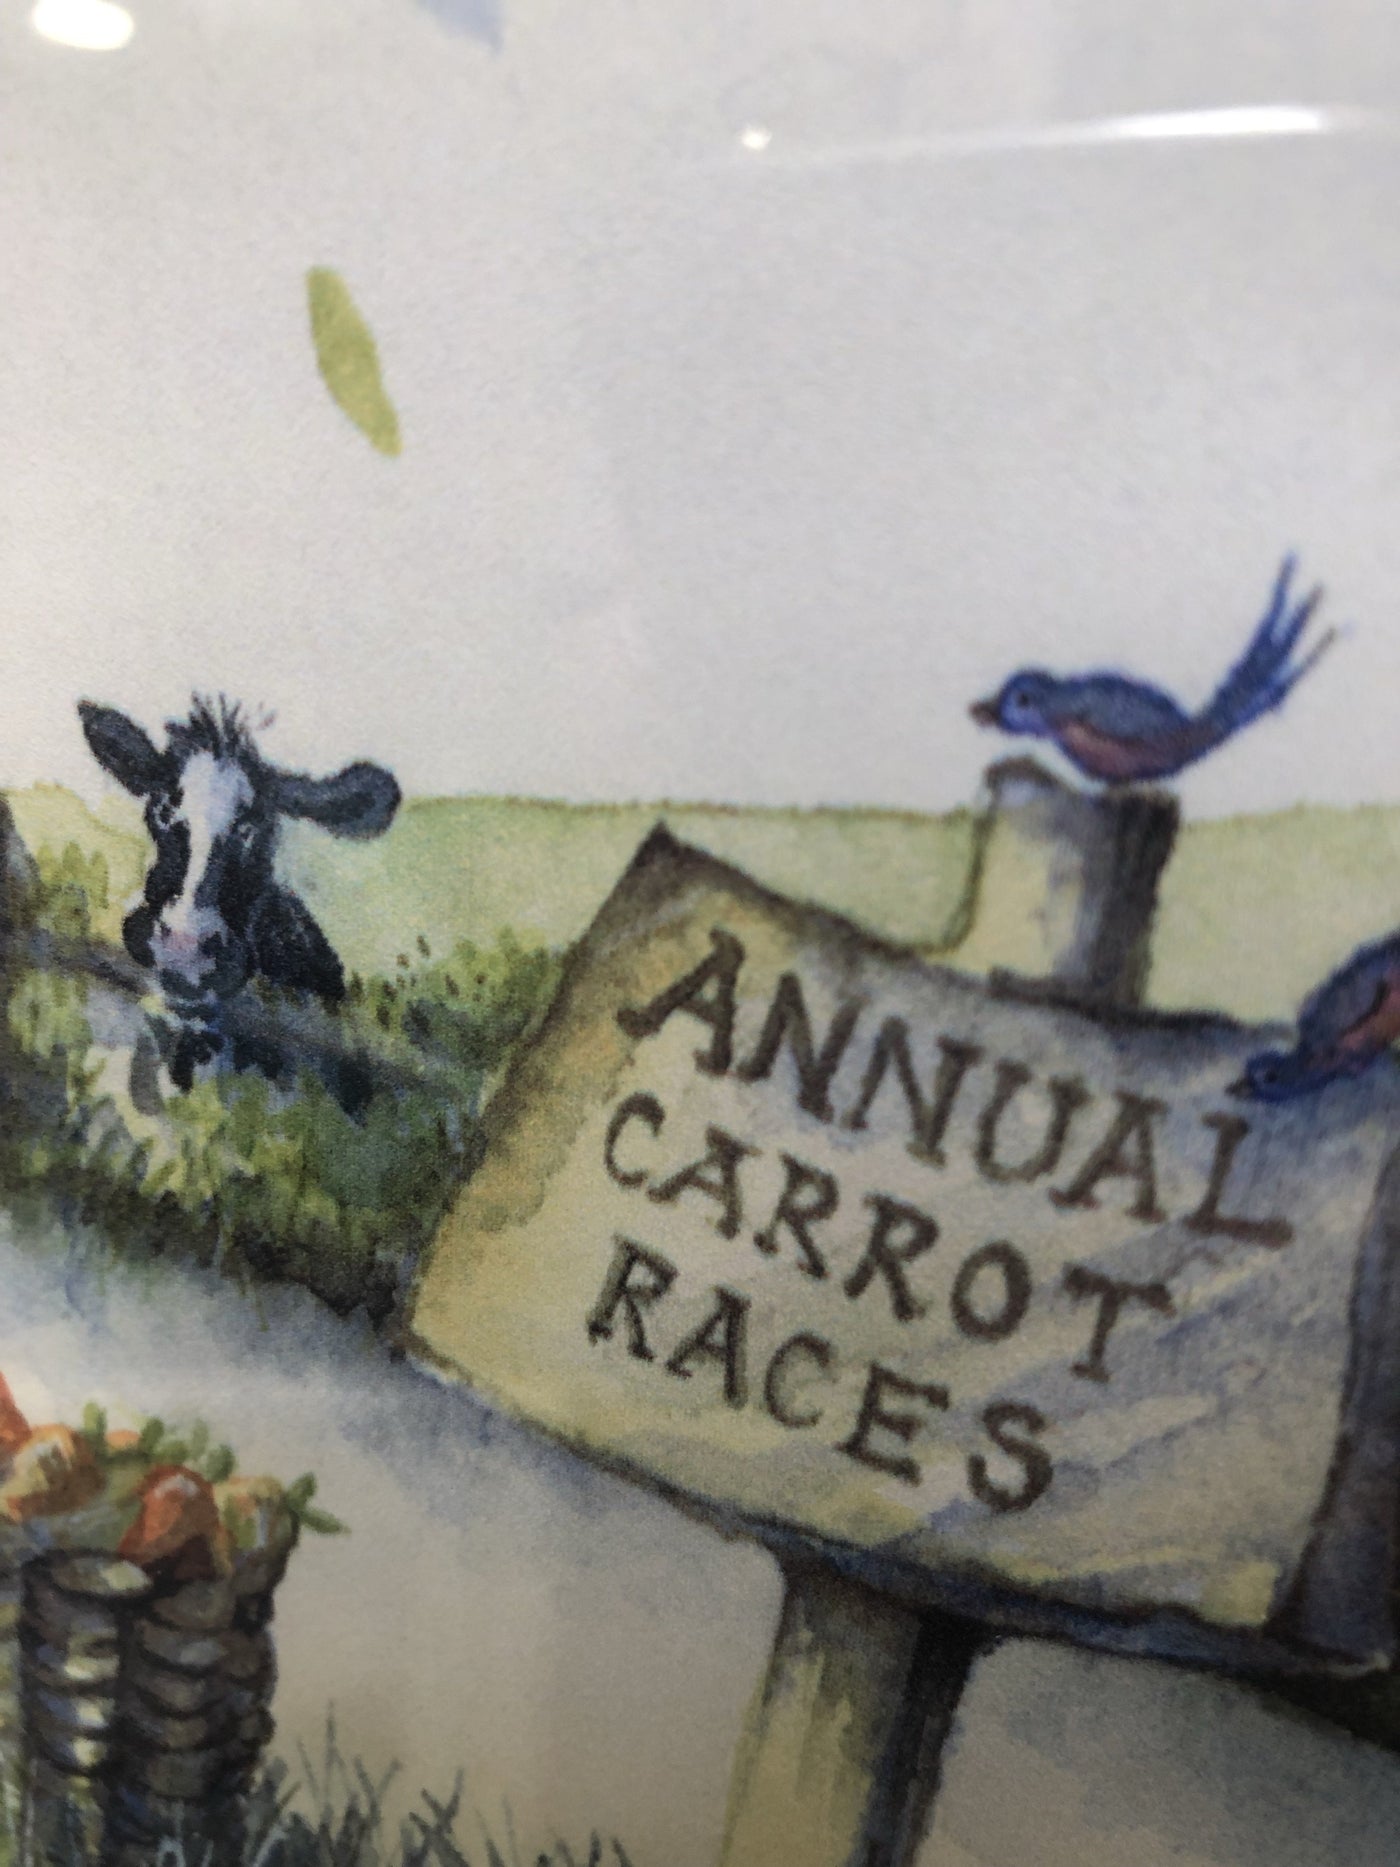 Annual Carrot Race By Catherine Stephenson *EXCLUSIVE* - TheArtistsQuarter